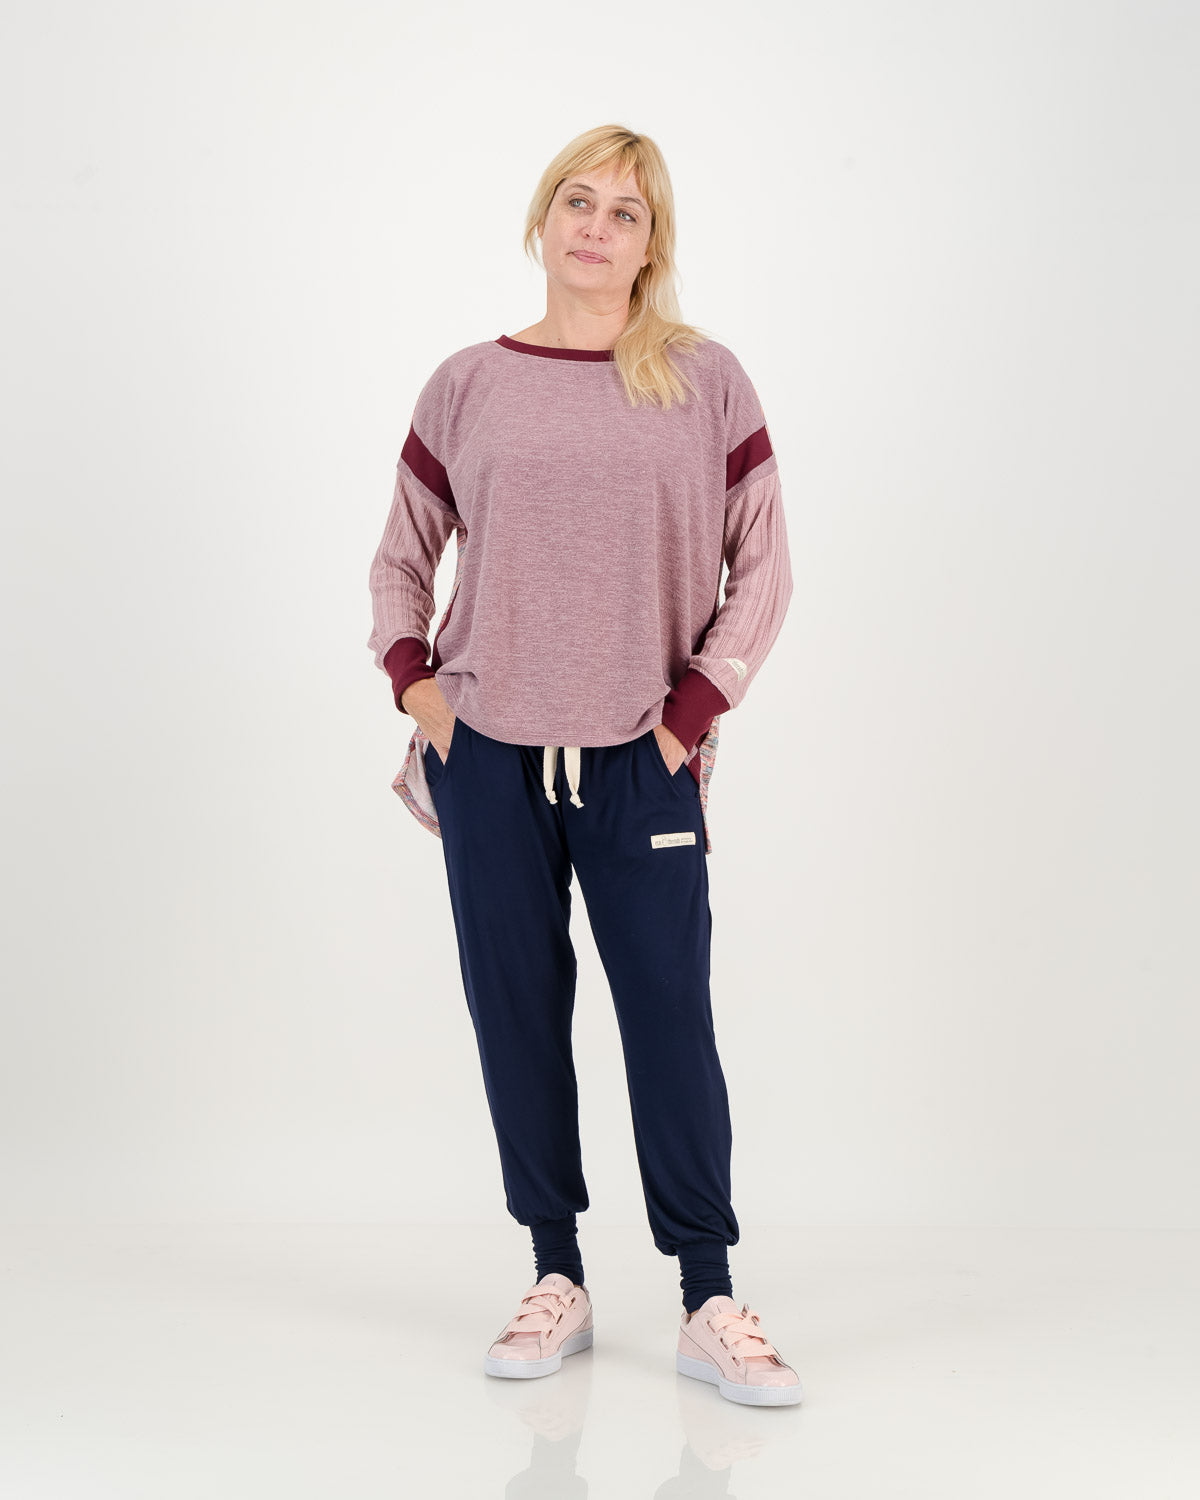 Carefree casual lavender Jersey, boxy shape with longer back, paired with navy comfy pants